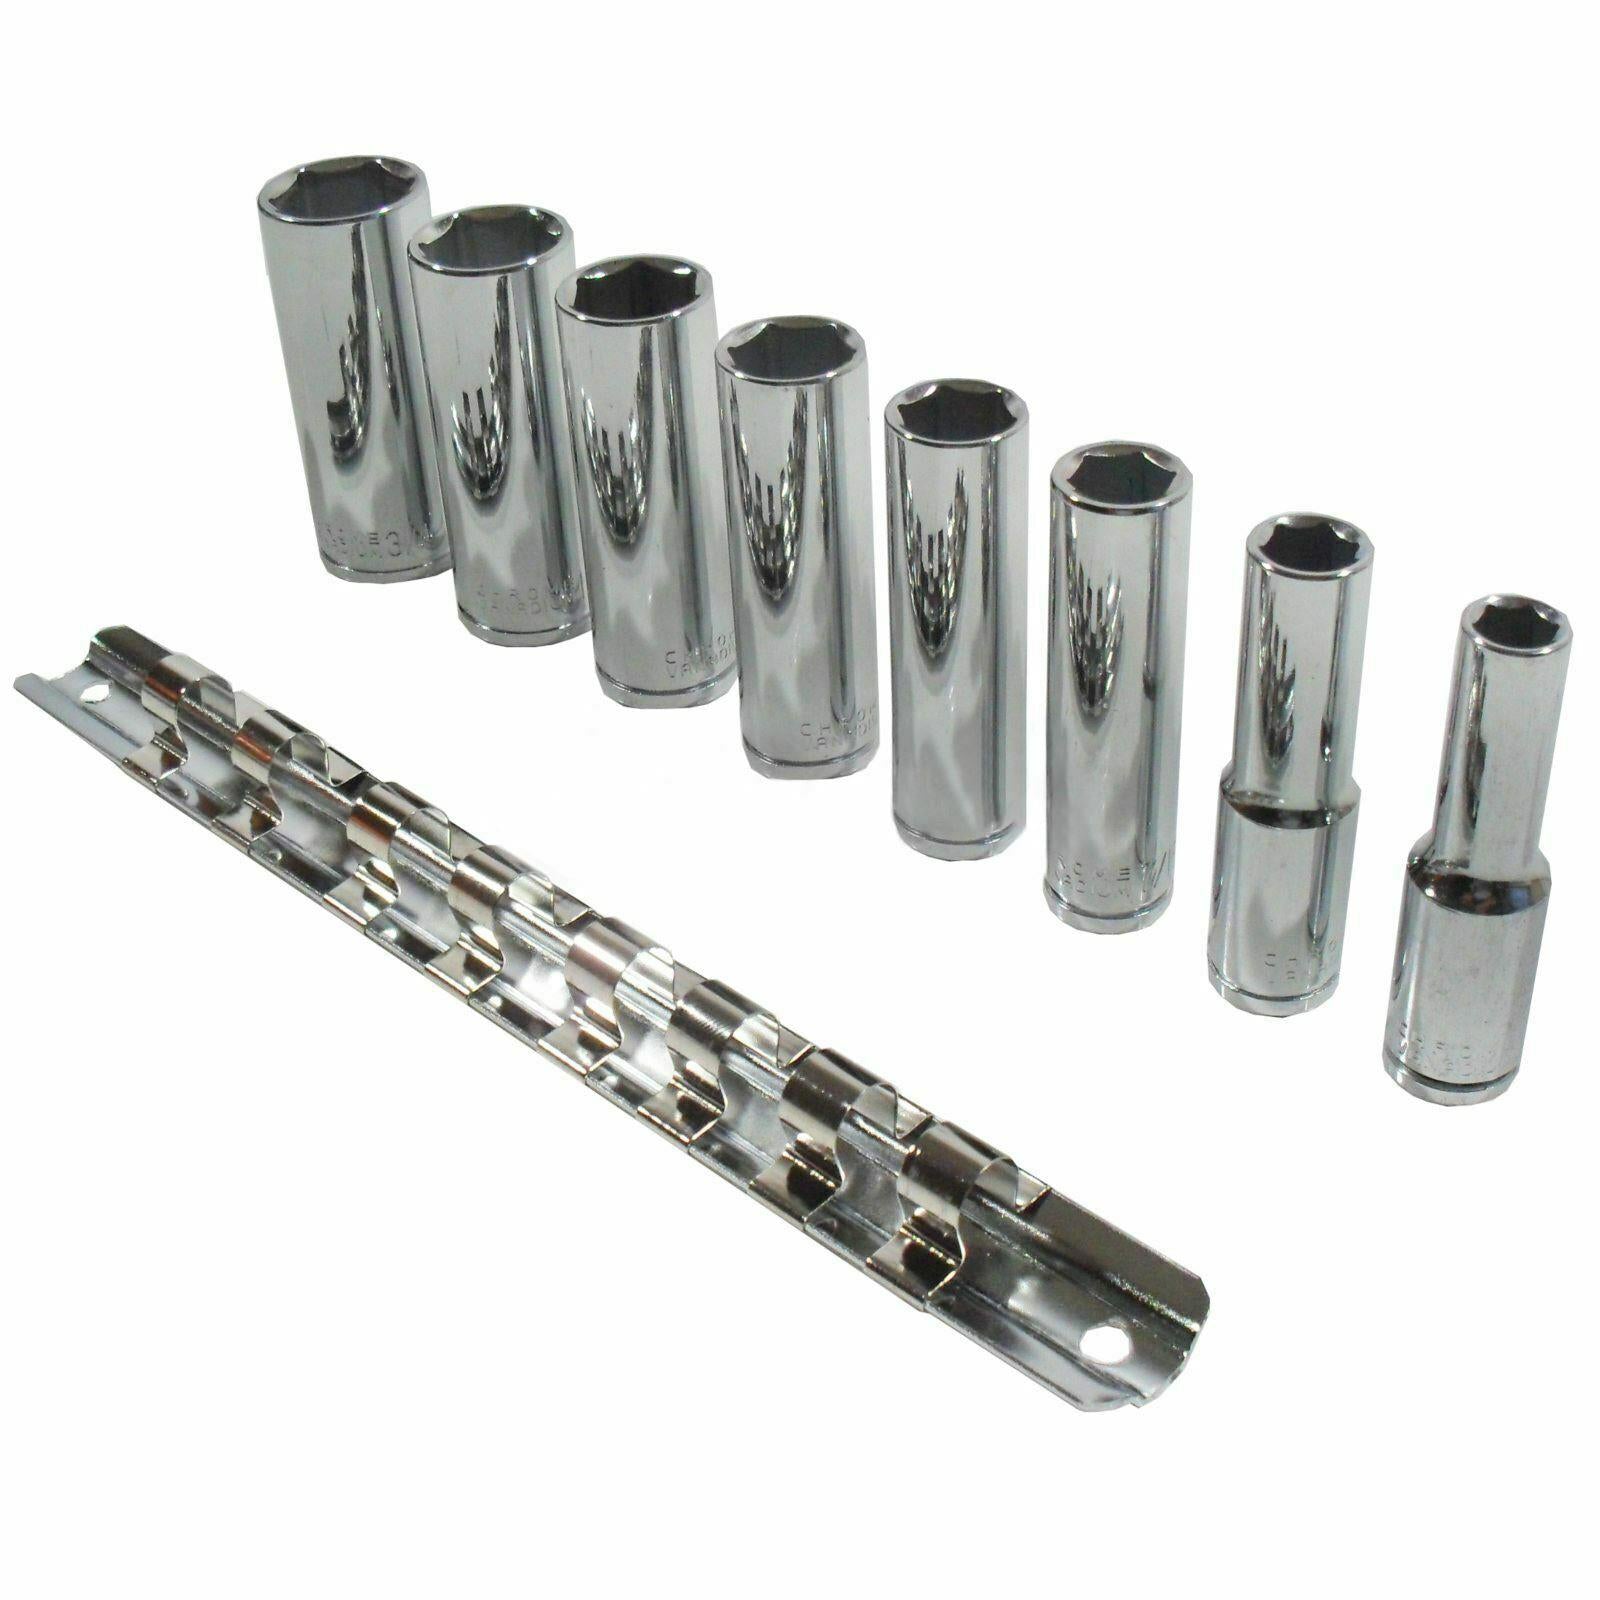 Imperial SAE AF 1/4" 3/8" & 1/2" Drive Deep Sockets 3/16" - 1" 28pc 6 Sided